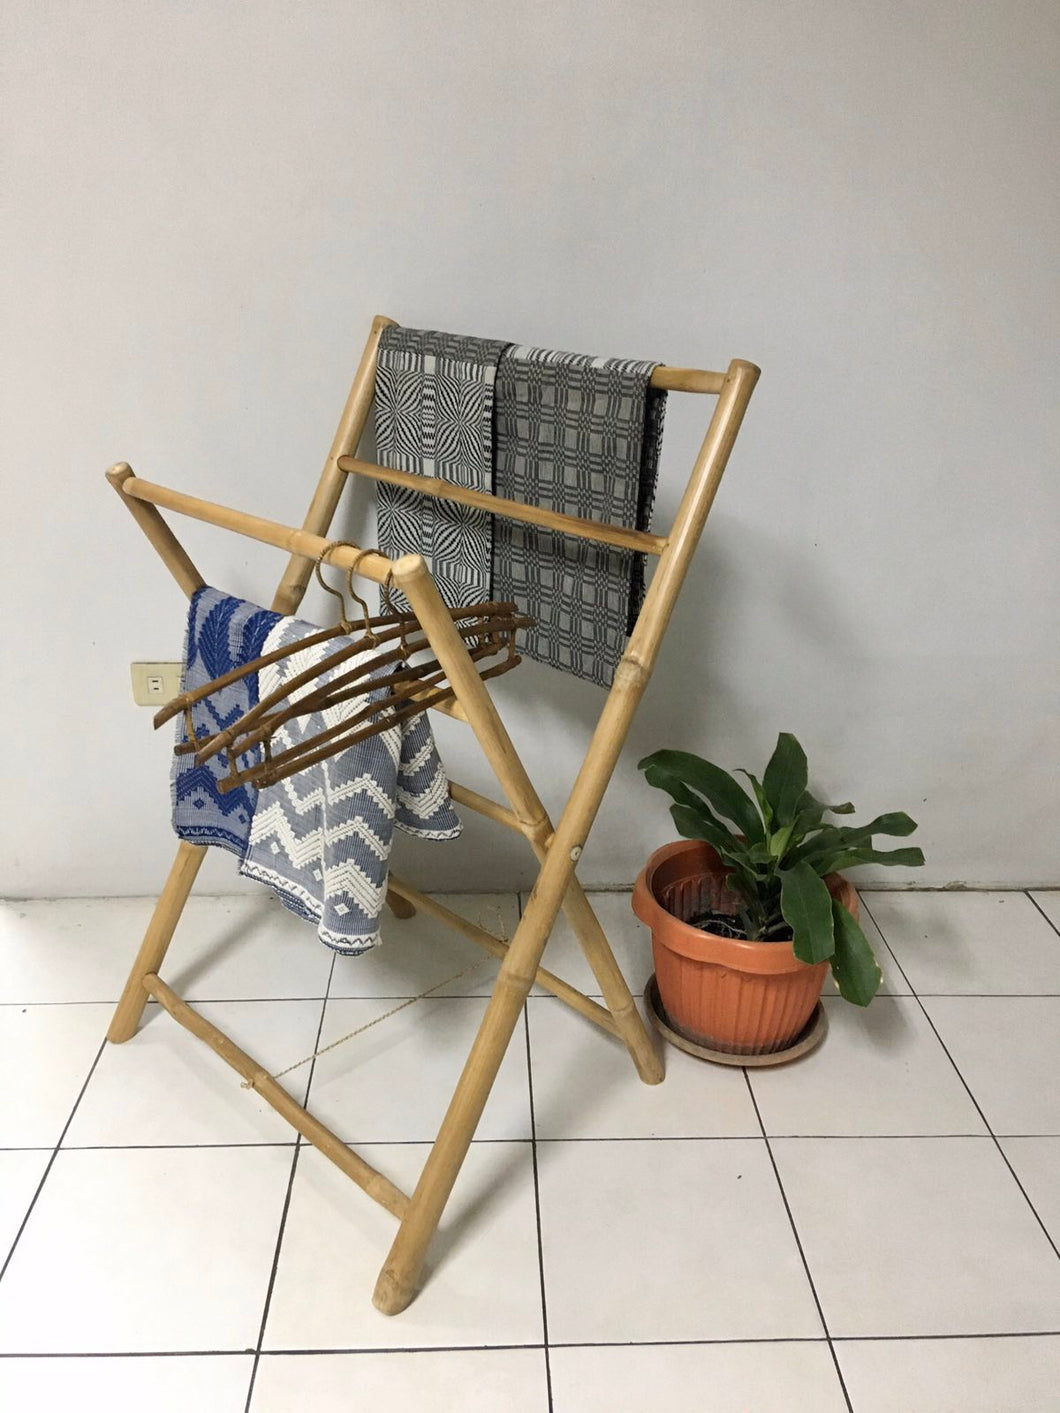 Veronica Bamboo clothes rack dryer